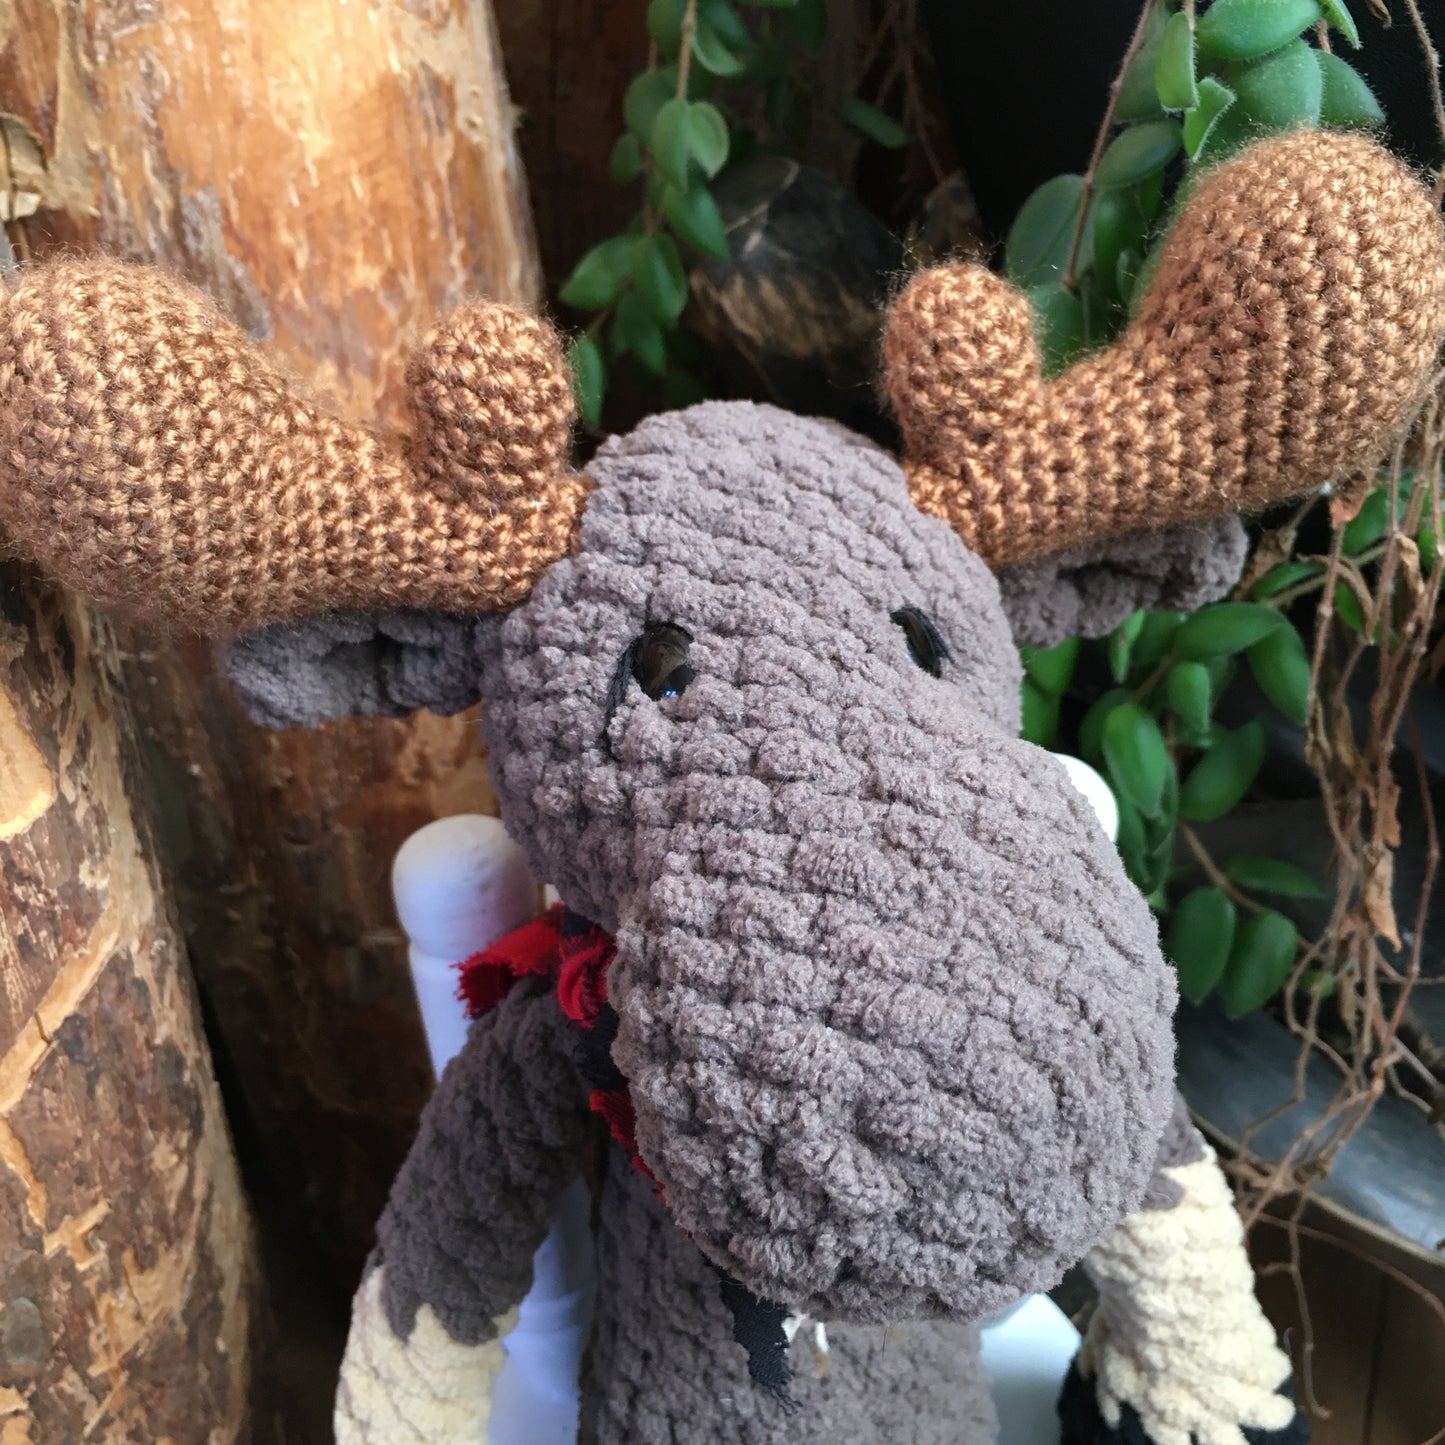 The chocolate NONORIGNAL with safe eyes, the lumberjack-style moose plush, Can be personalized in BIRTH DOGGY